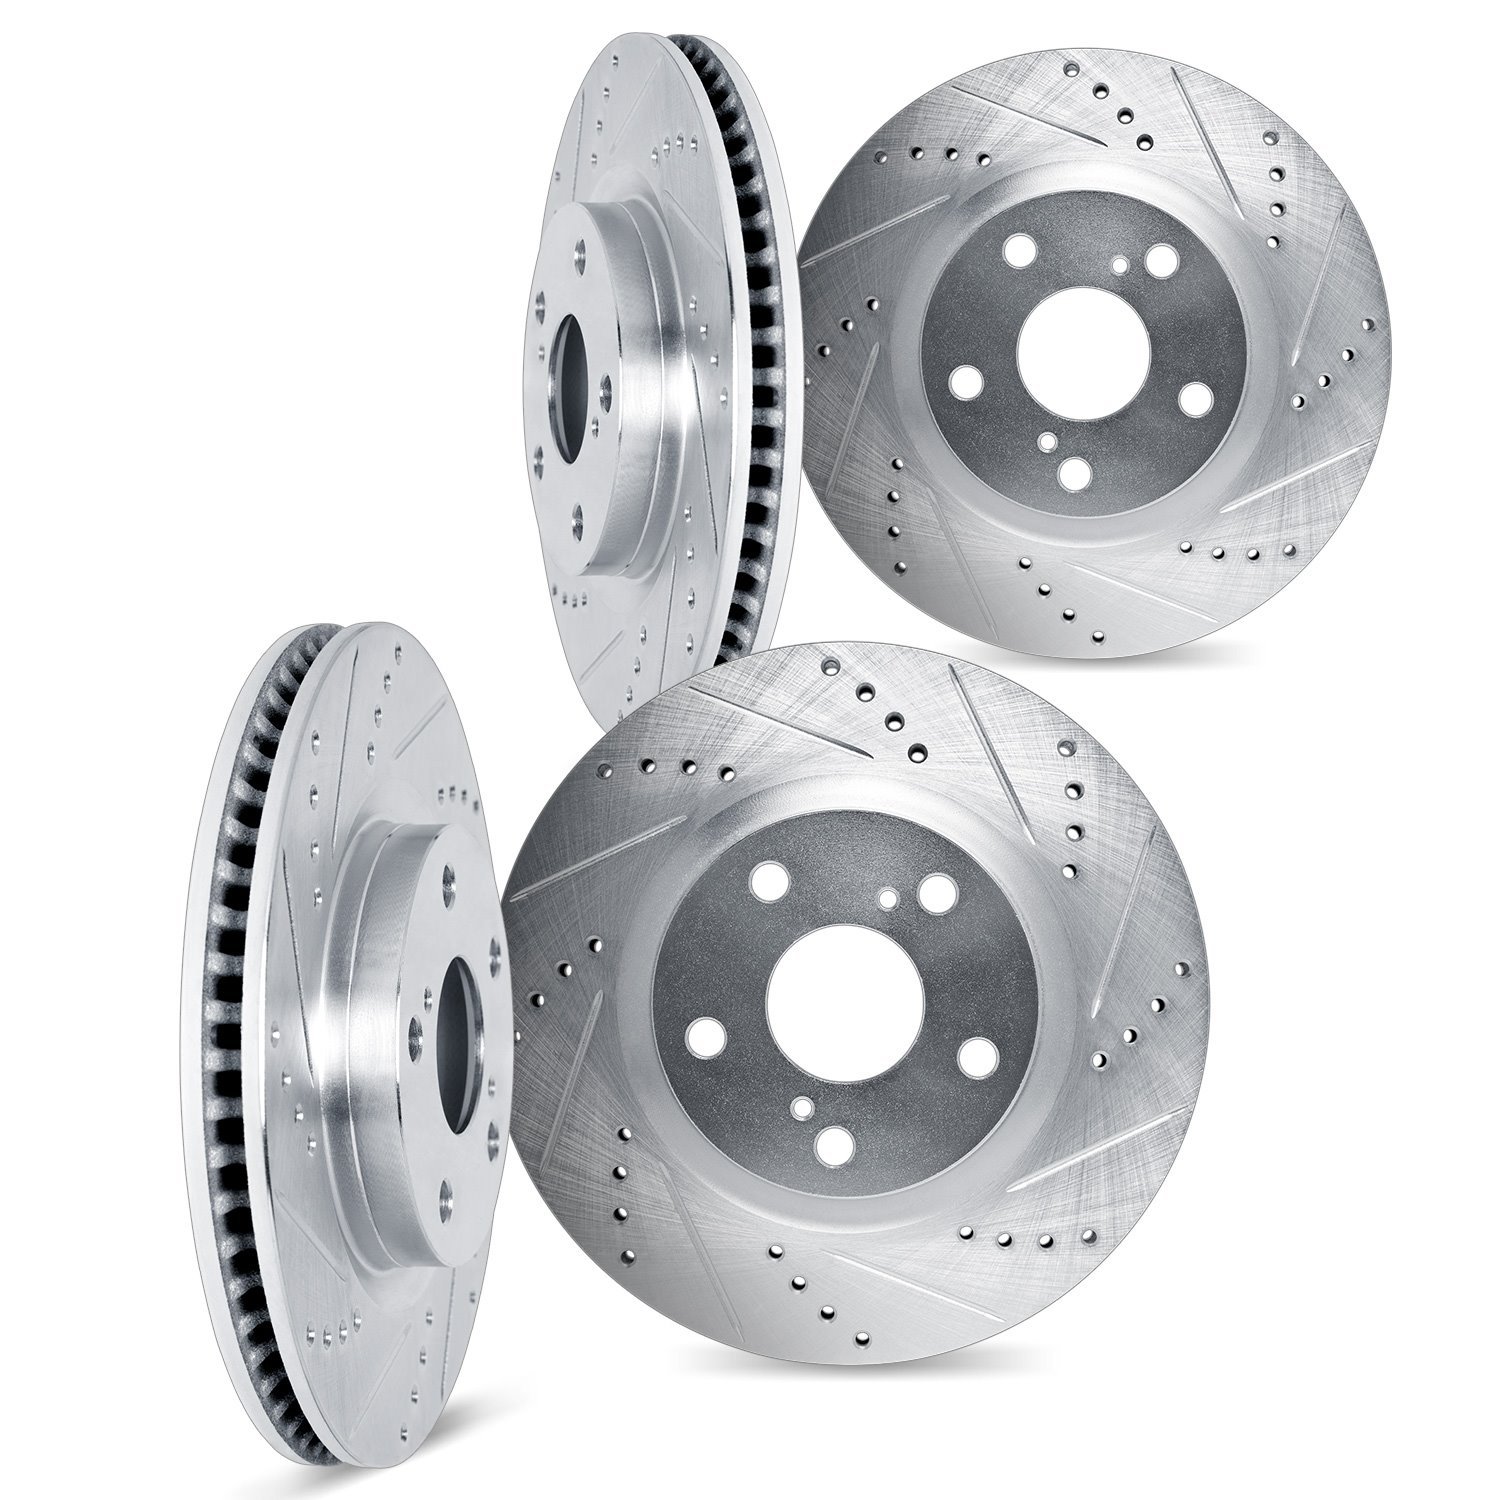 Drilled/Slotted Brake Rotors [Silver], 1997-2001 Infiniti/Nissan